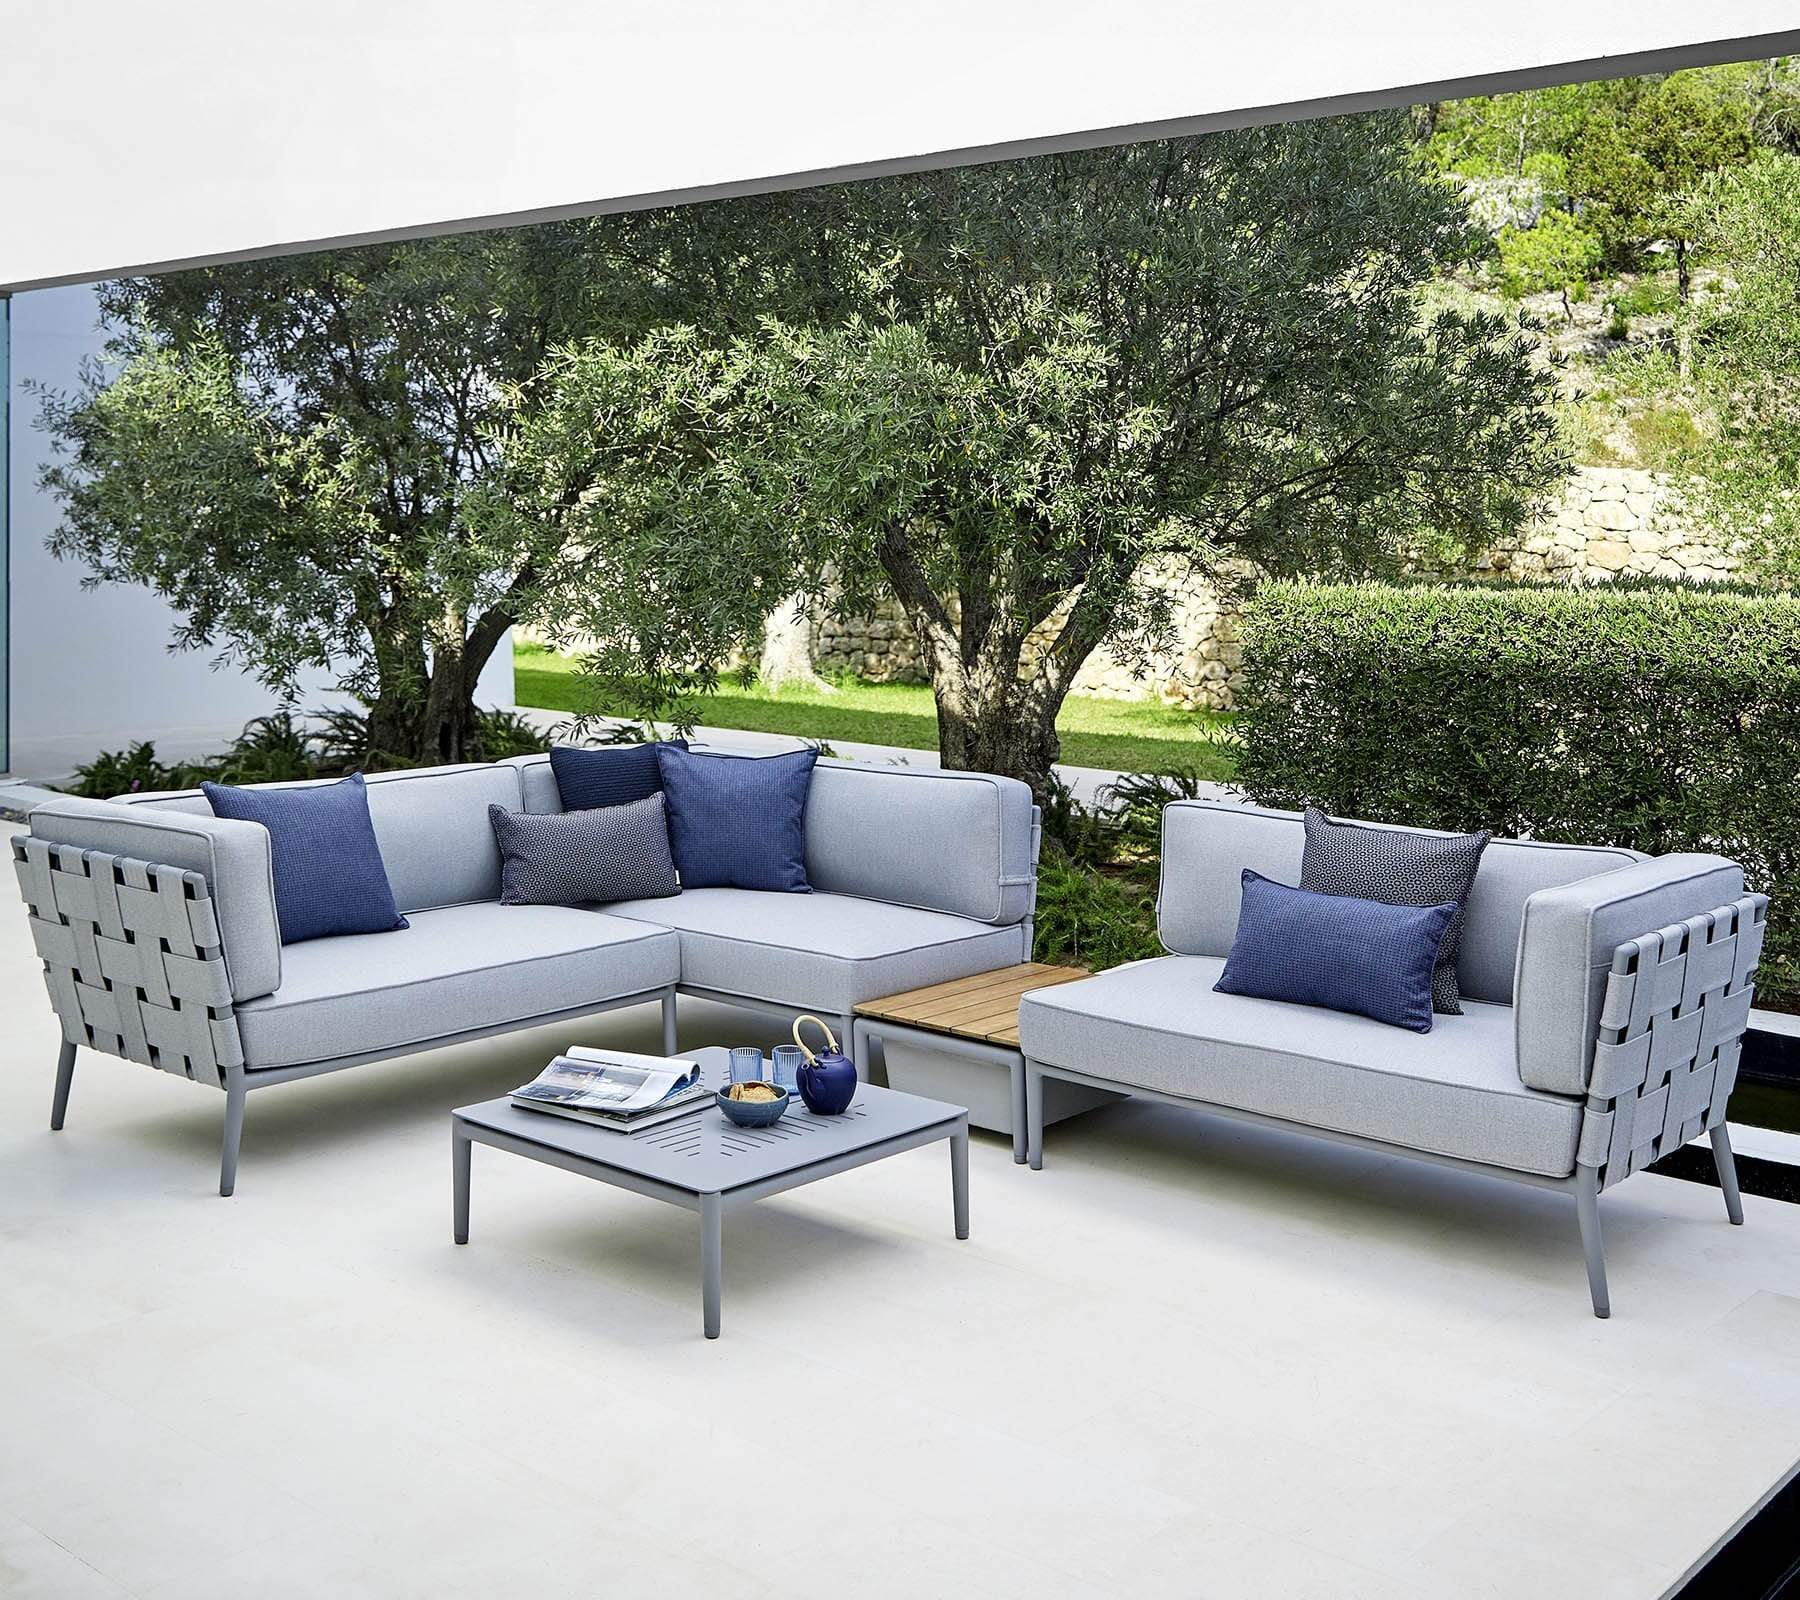 Boxhill's Conic Outdoor Coffee Table Light Grey lifestyle image with Conic Sectional Sofa and Conic Box Outdoor Storage Table at patio